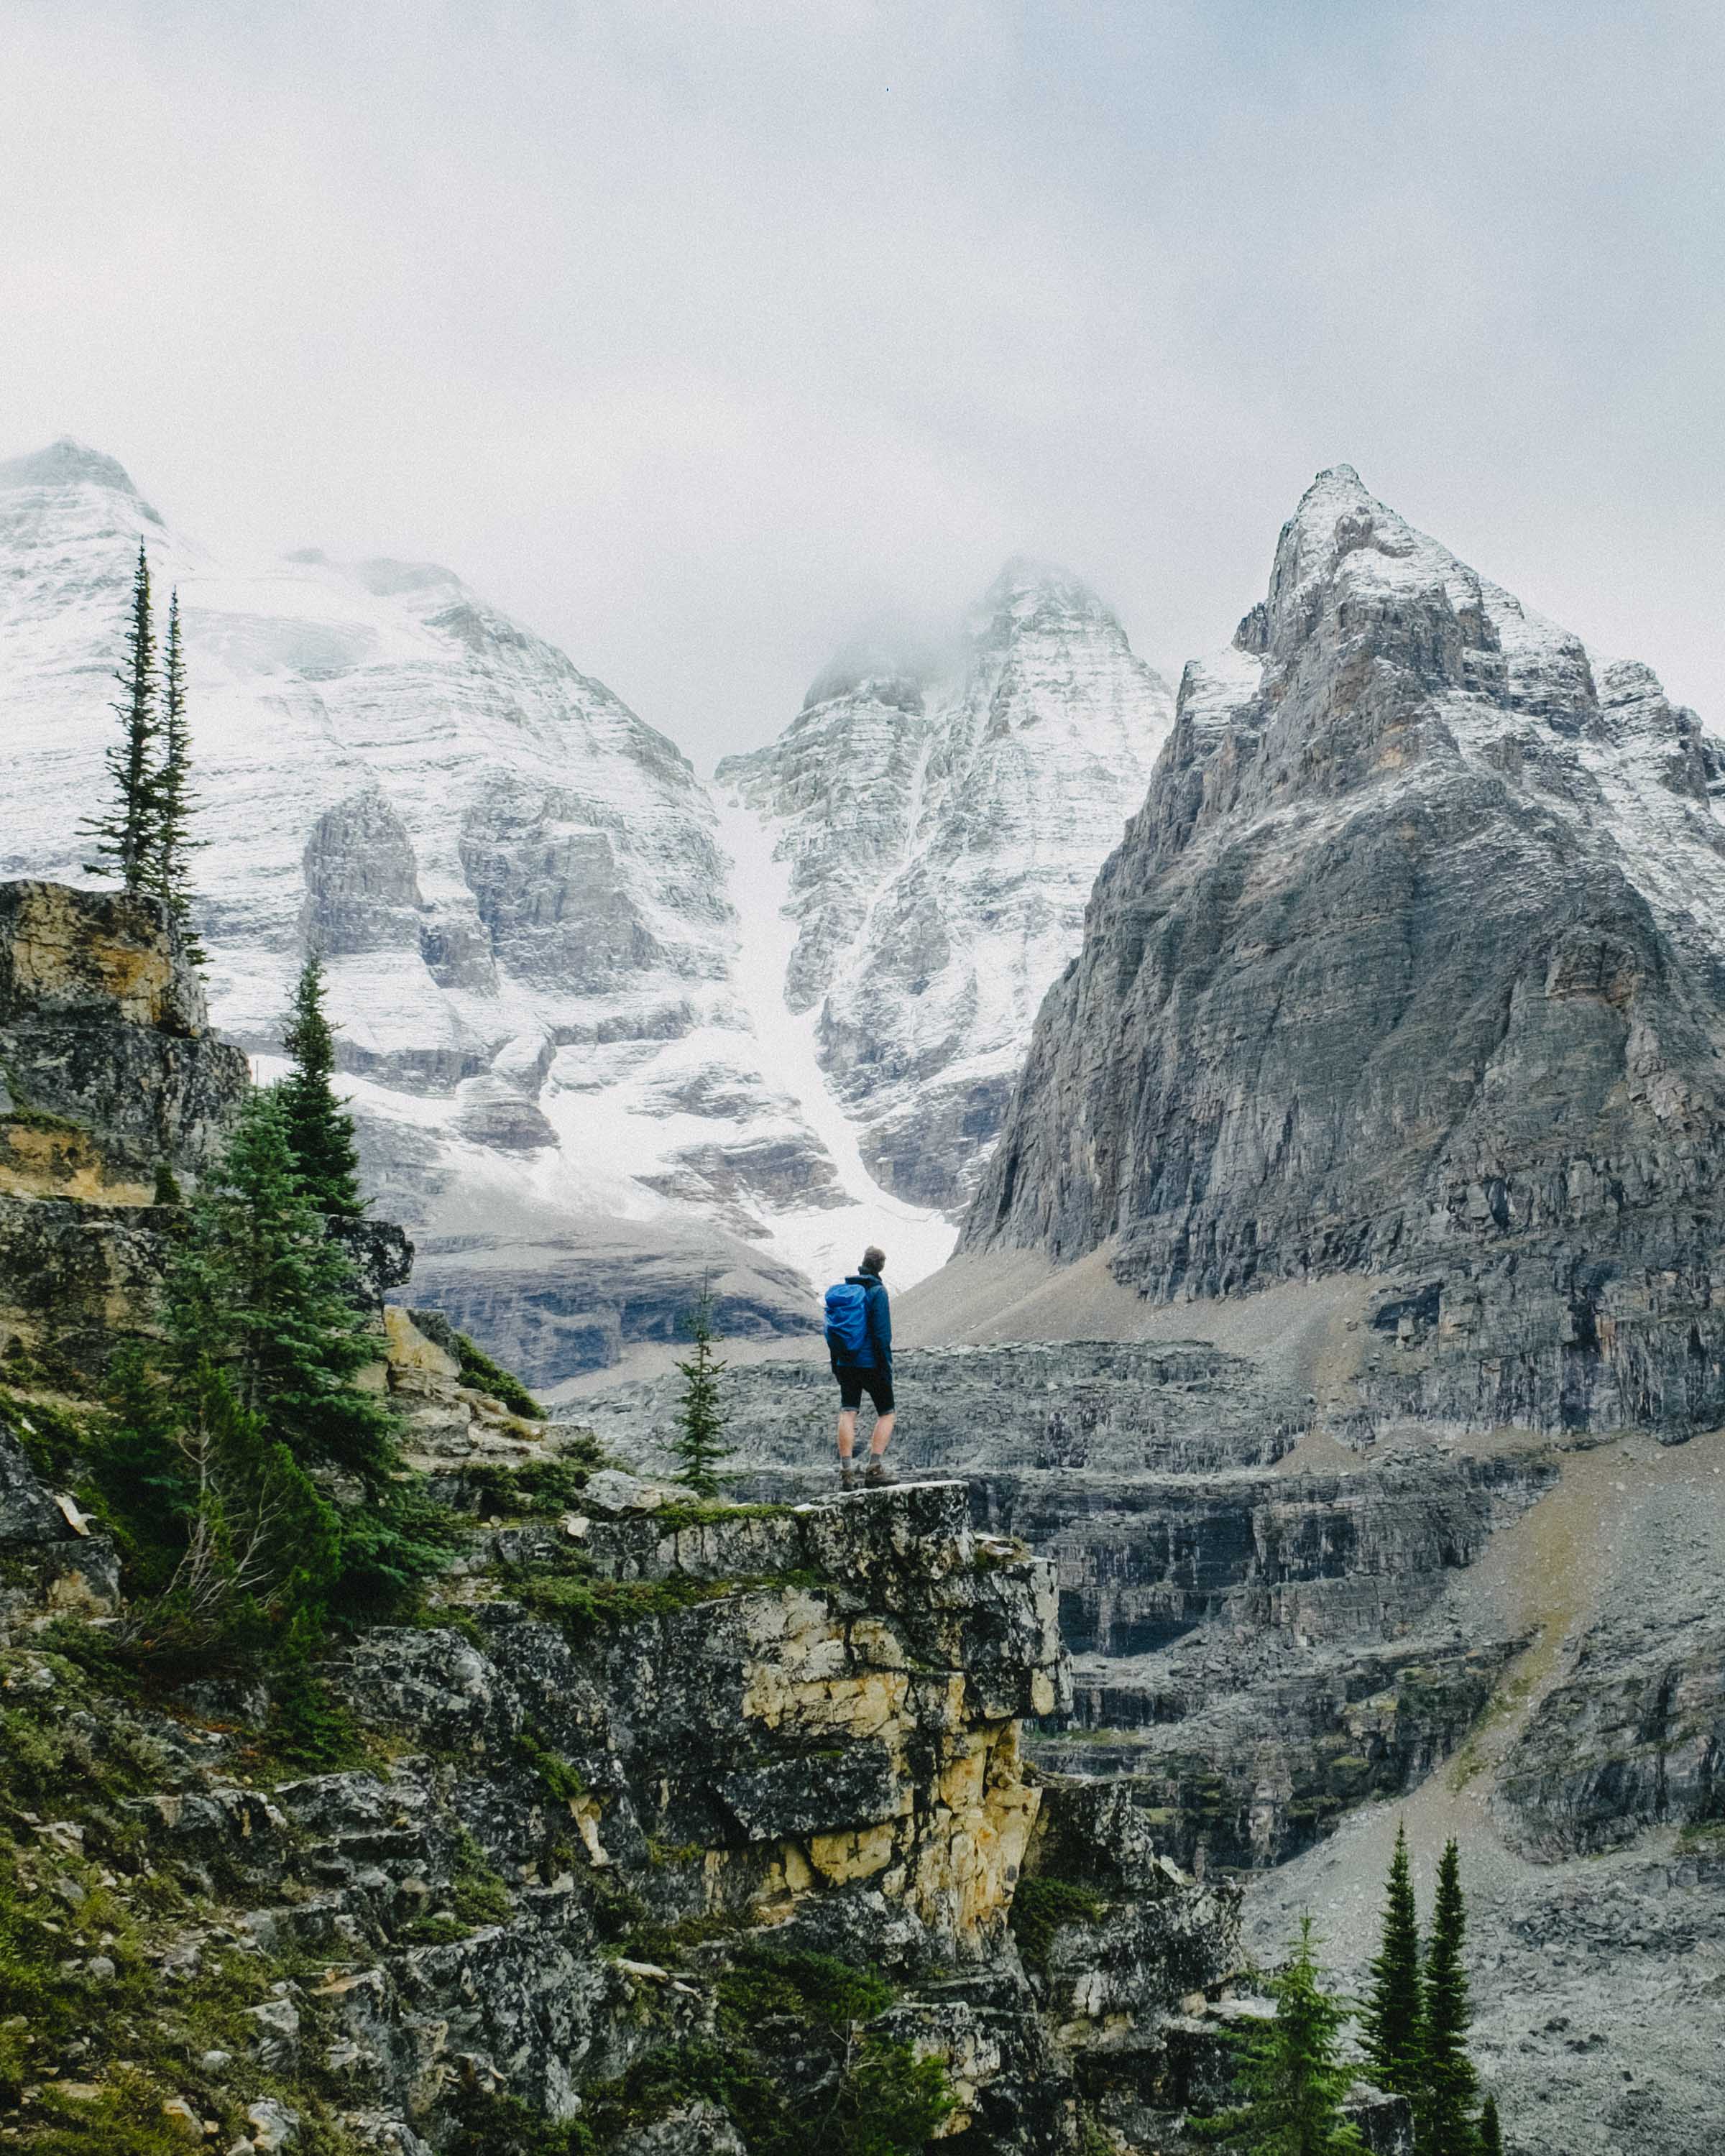 Hiking in the towering snow-dusted peaks of Yoho National Park